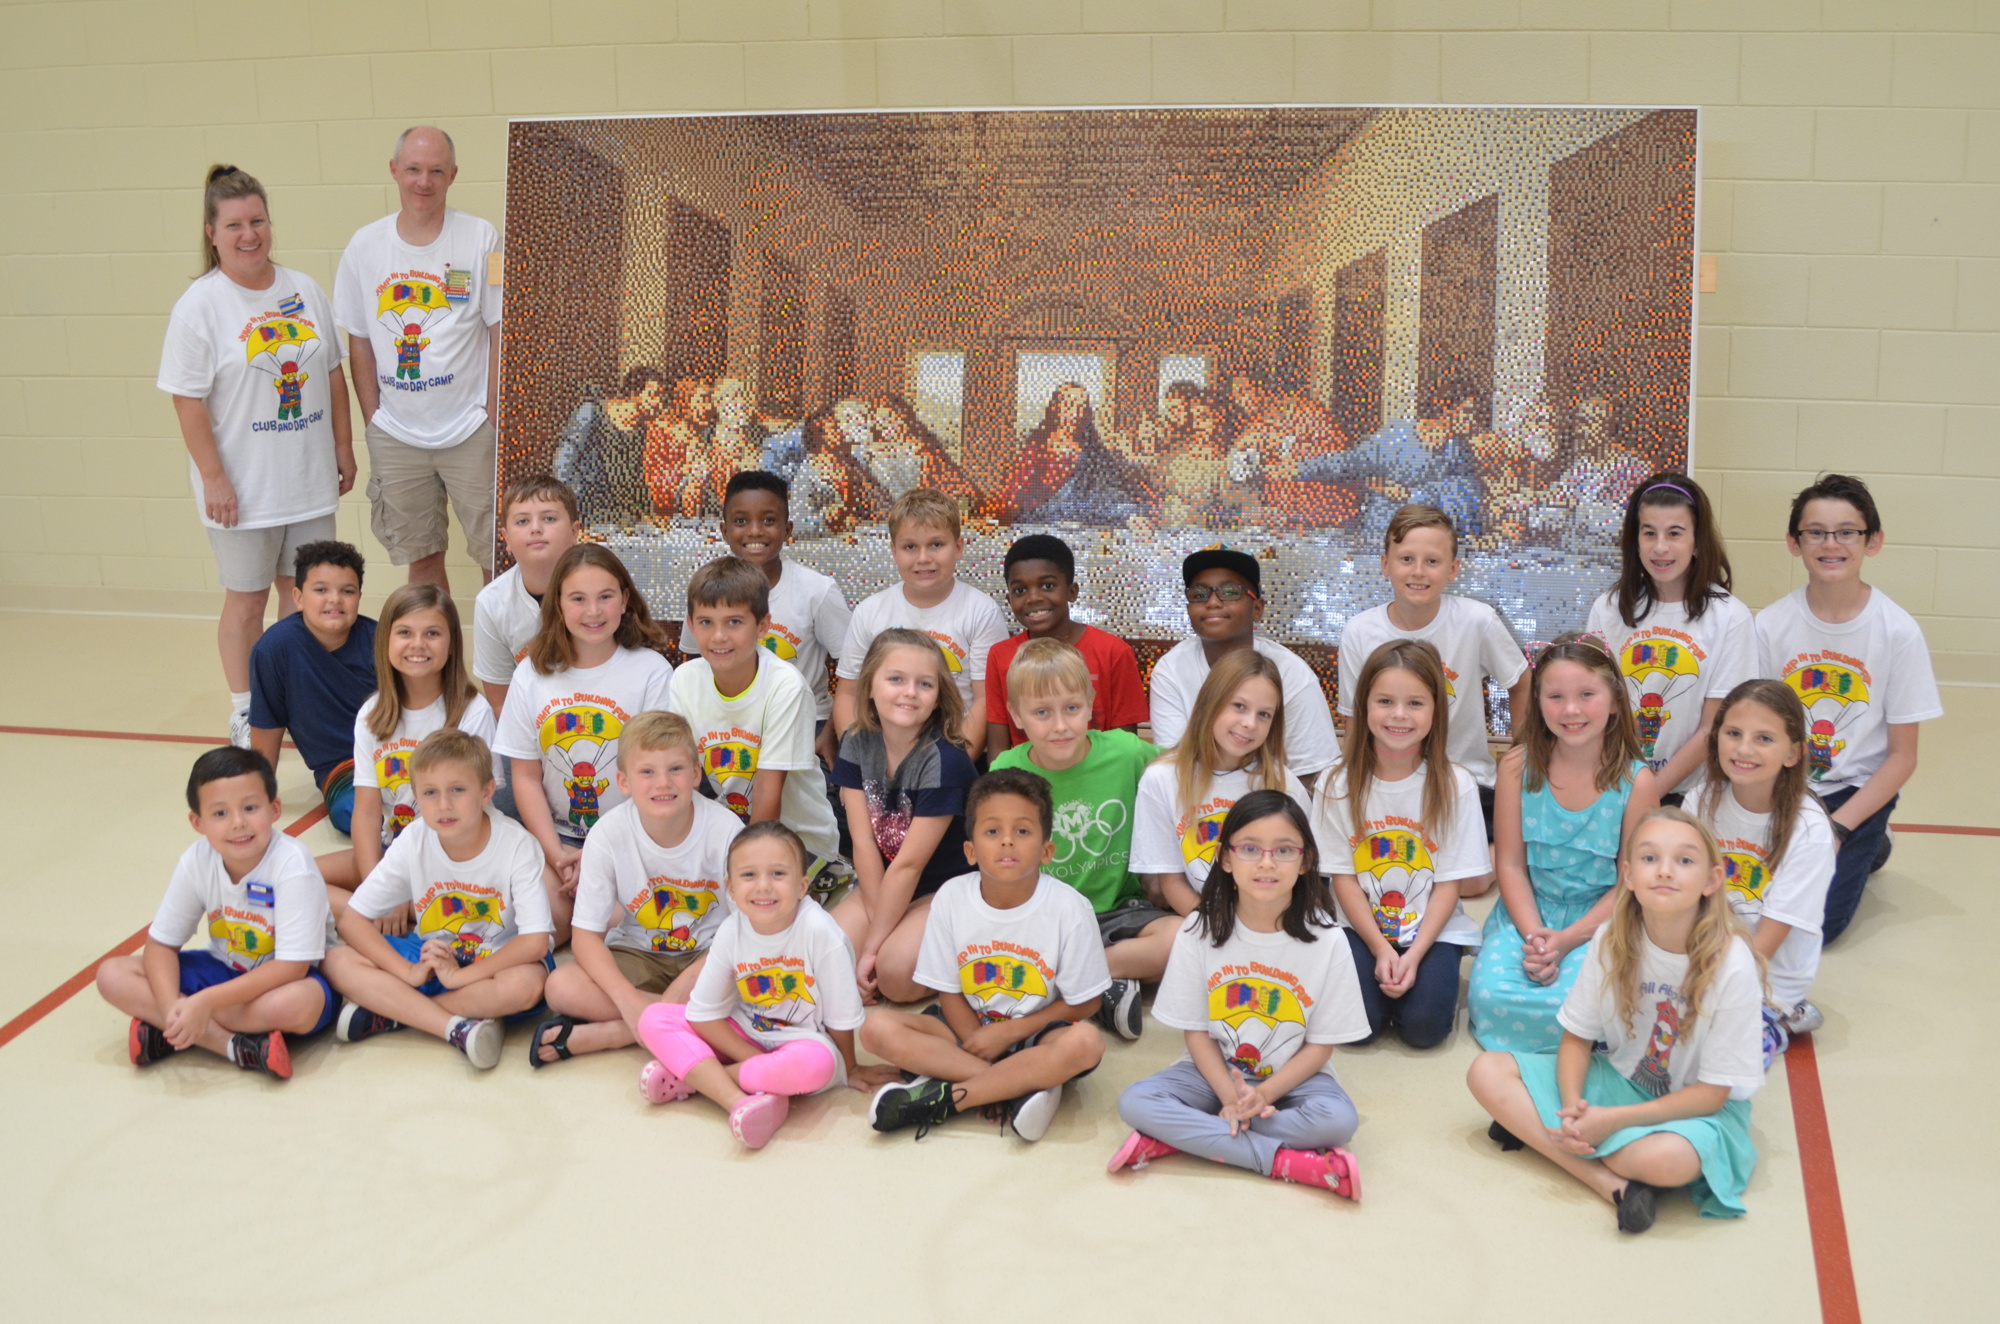 Some of the 73 students who helped build the 78,408-piece LEGO mosaic of 